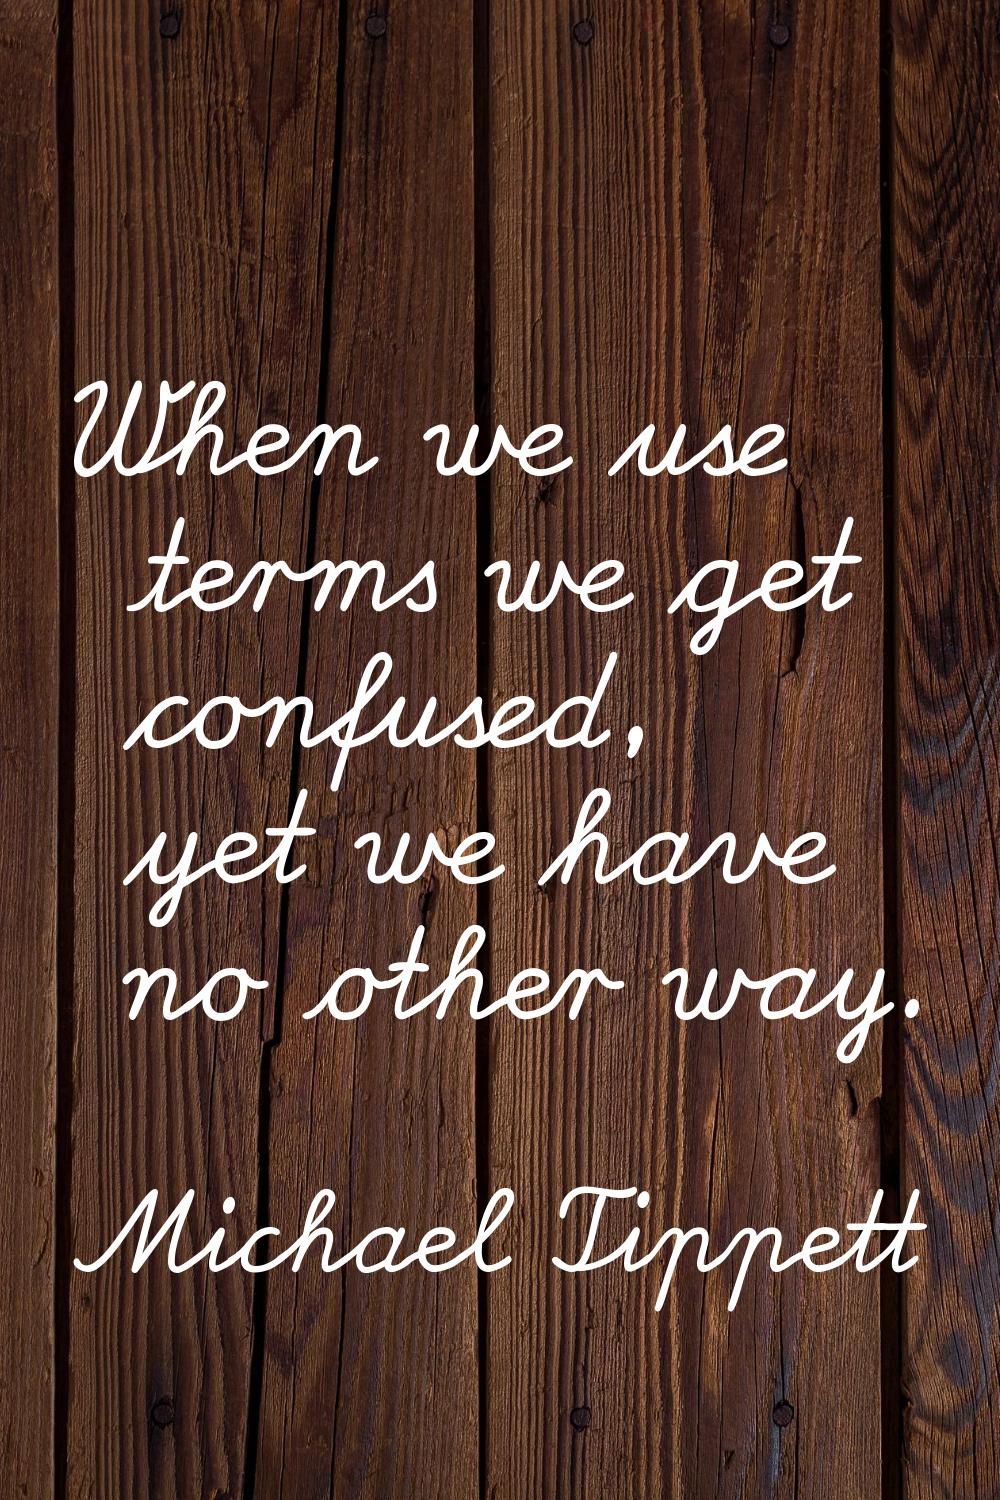 When we use terms we get confused, yet we have no other way.